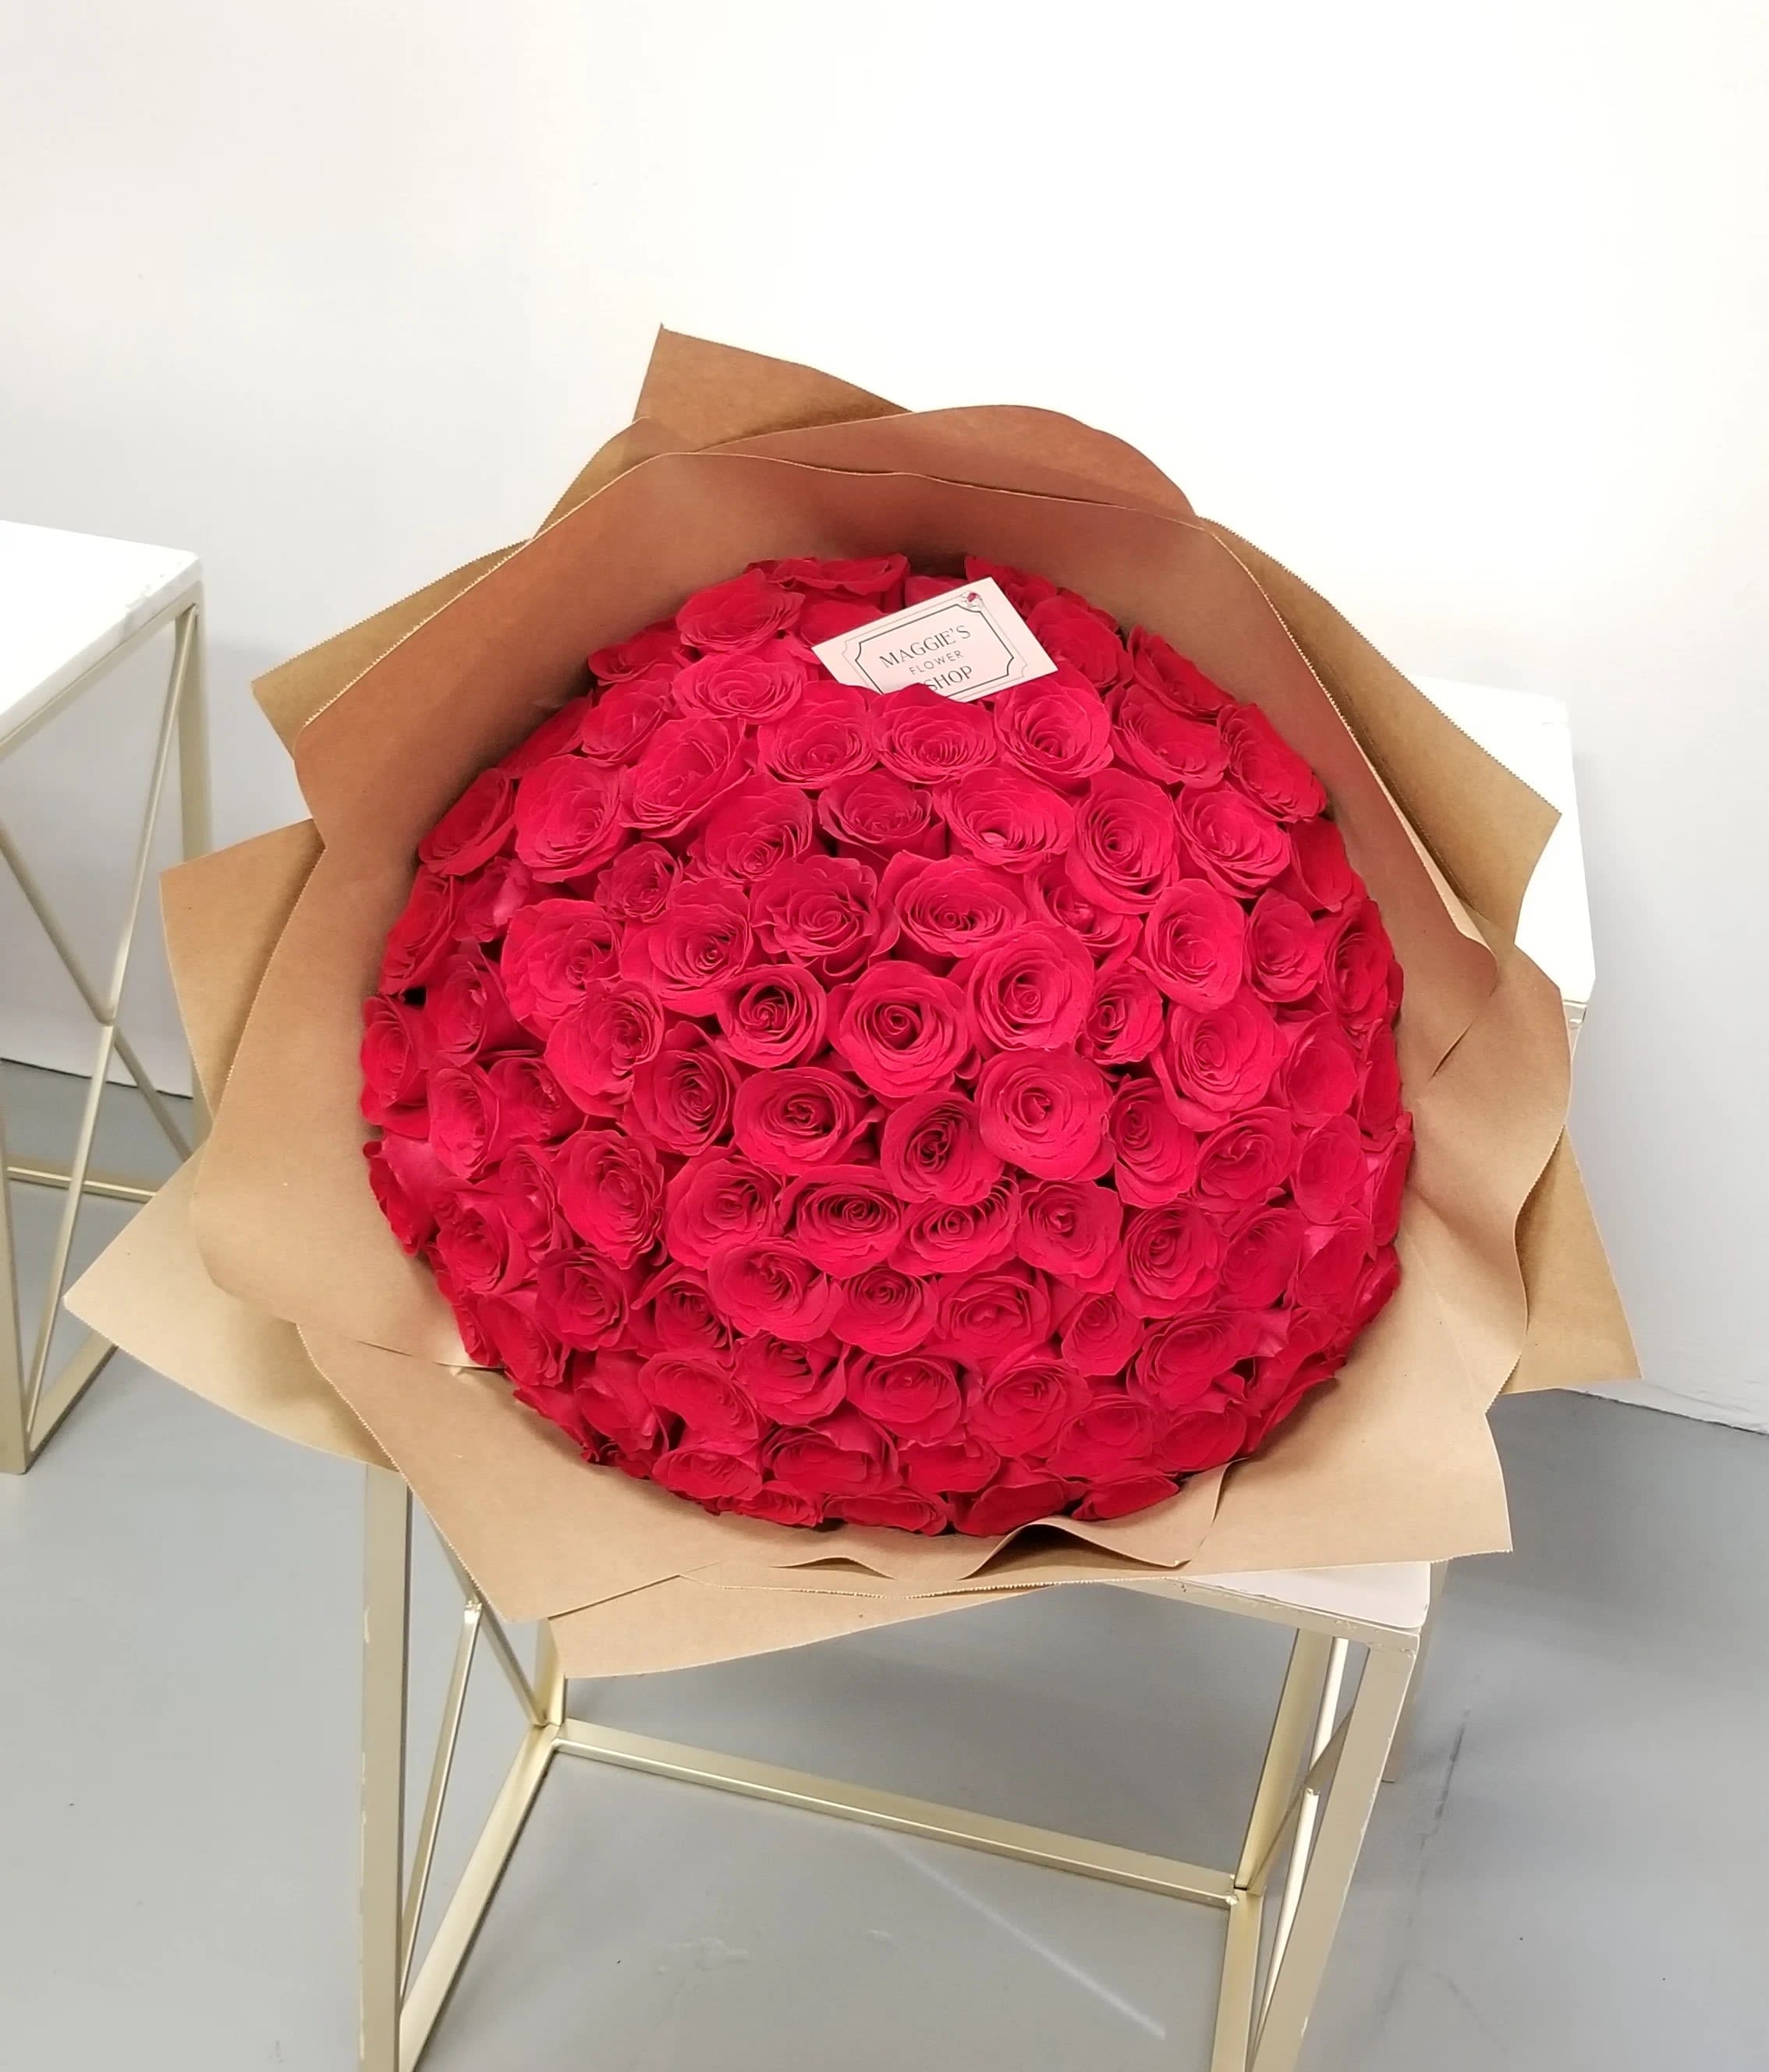 100 Red Rose Bouquet in Maywood, CA | Maggie's Flower Shop